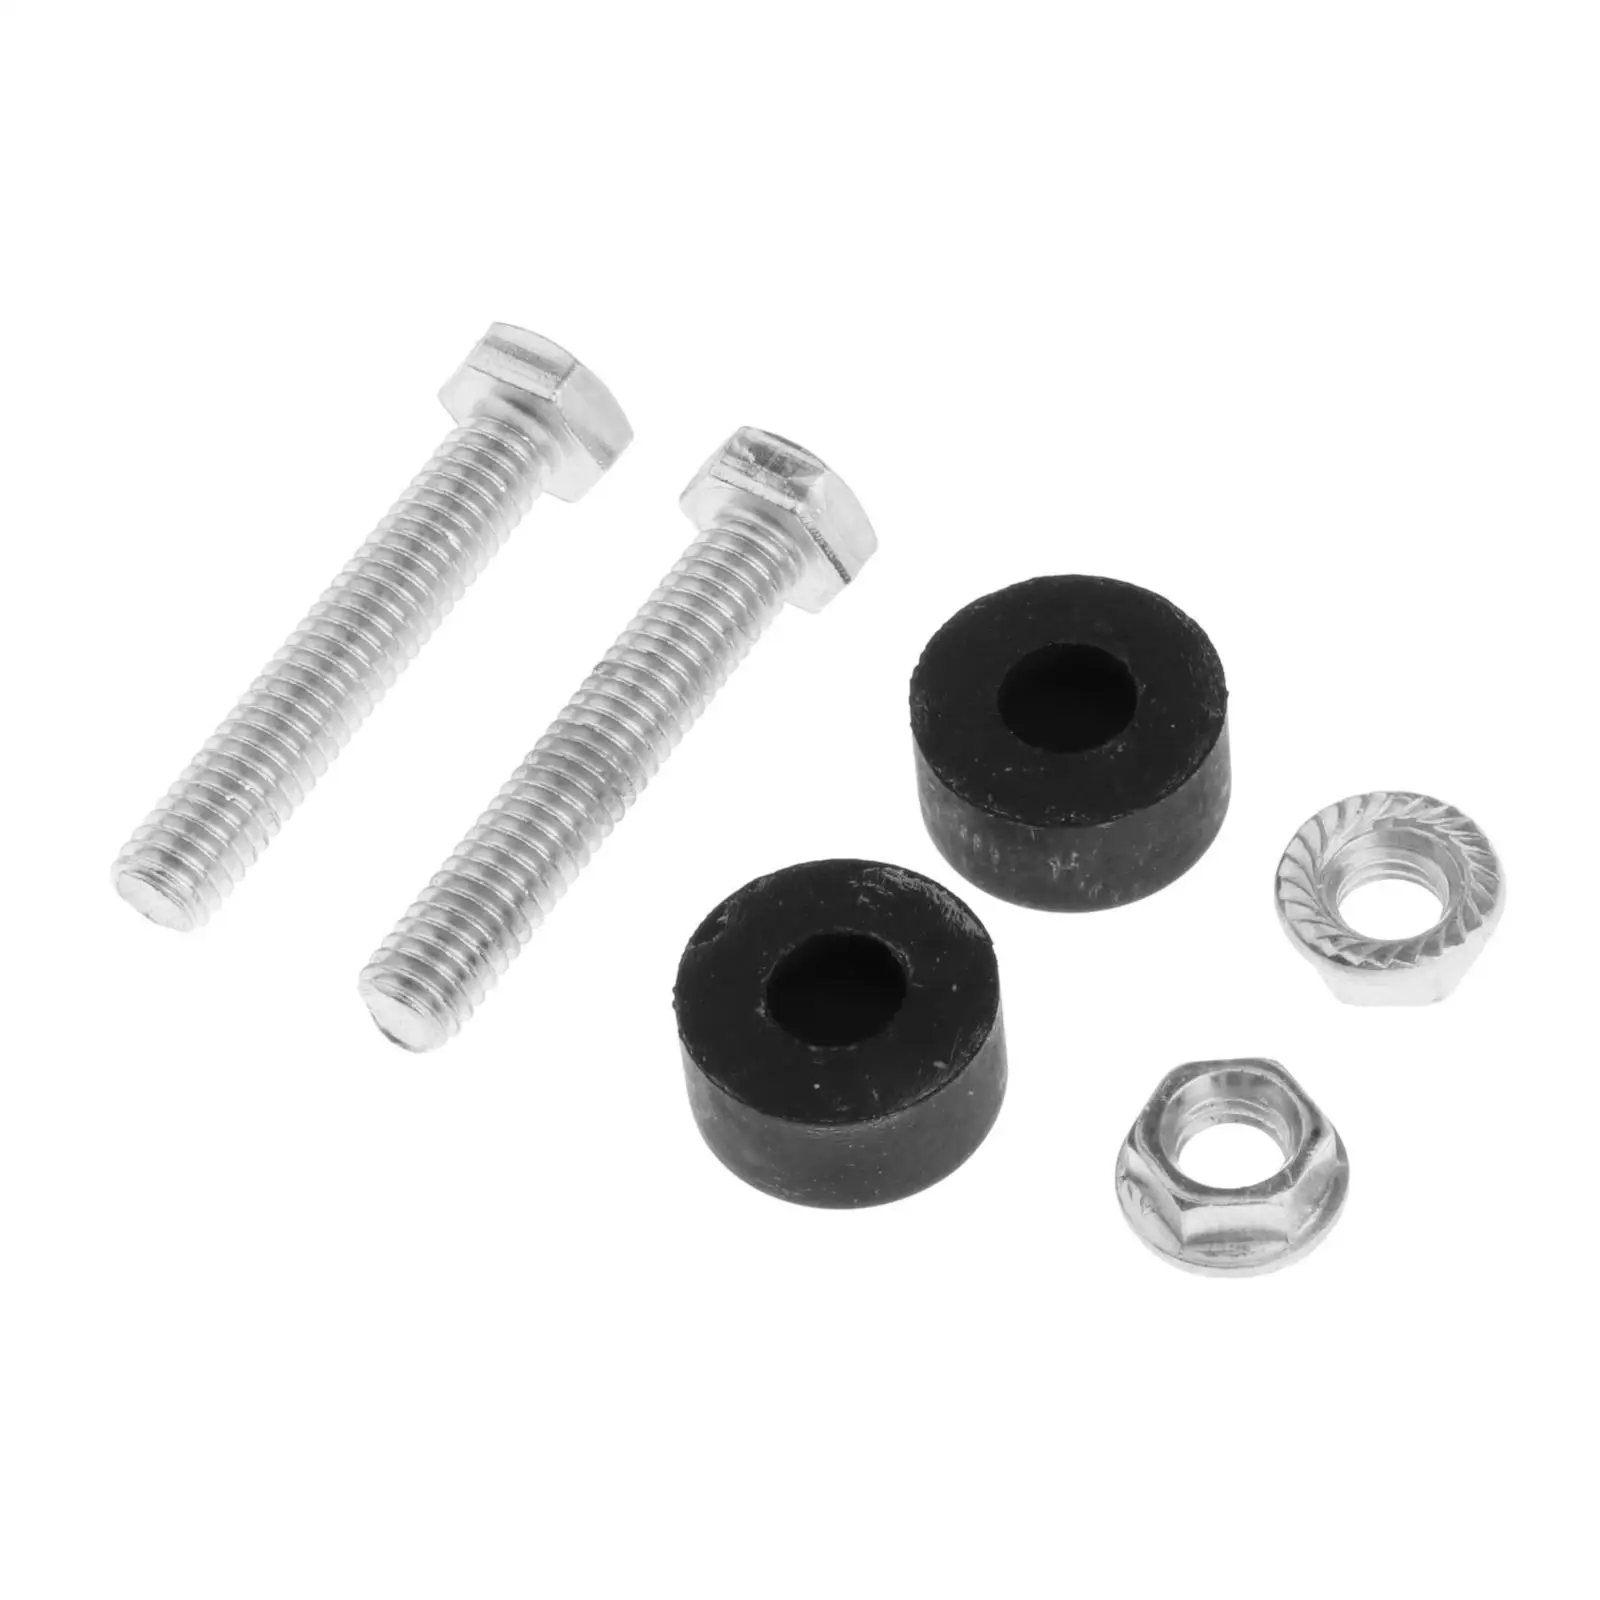 2Pcs Car Hood Adjuster Bumper Stopper Kit for  Easy To Install Parts